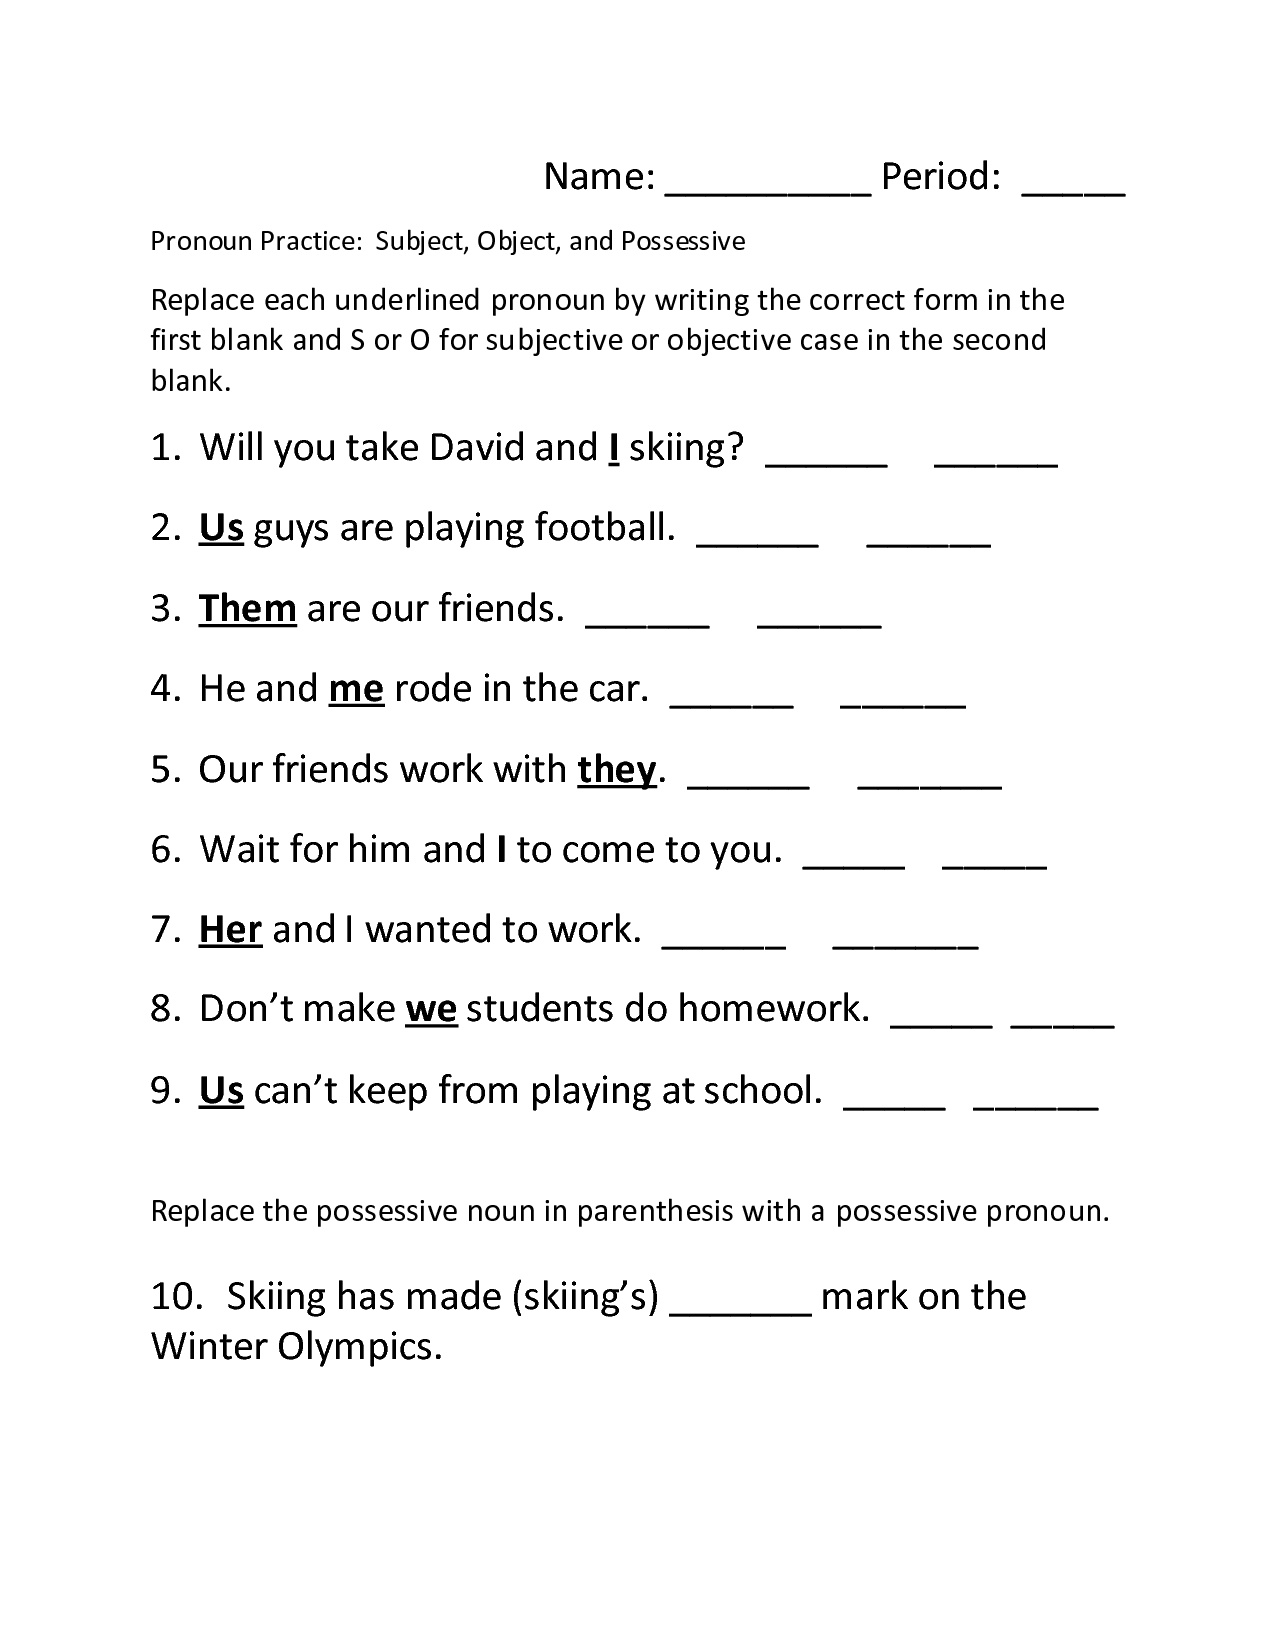 a-subject-pronouns-worksheet-1-spanish-answer-key-is-a-few-short-questionnaires-on-ejercicios